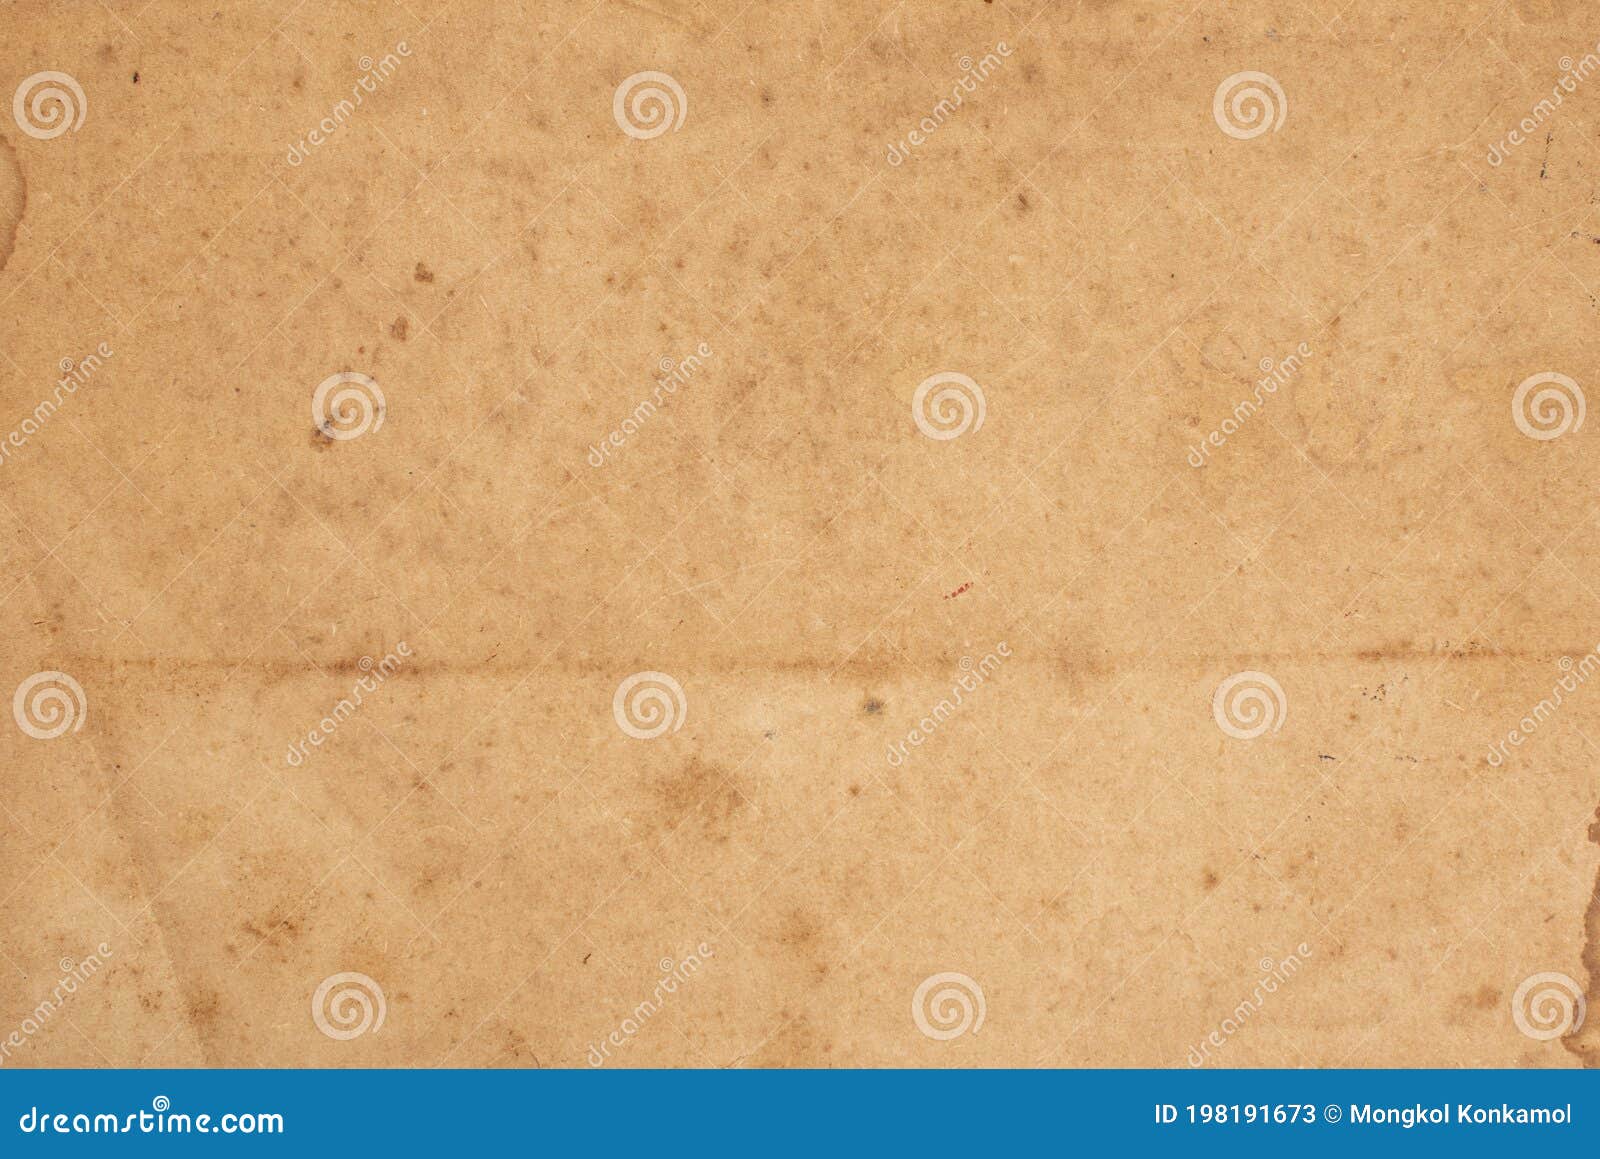 Earthy Brown Craft Paper Texture Background, Rustic Paper, Craft